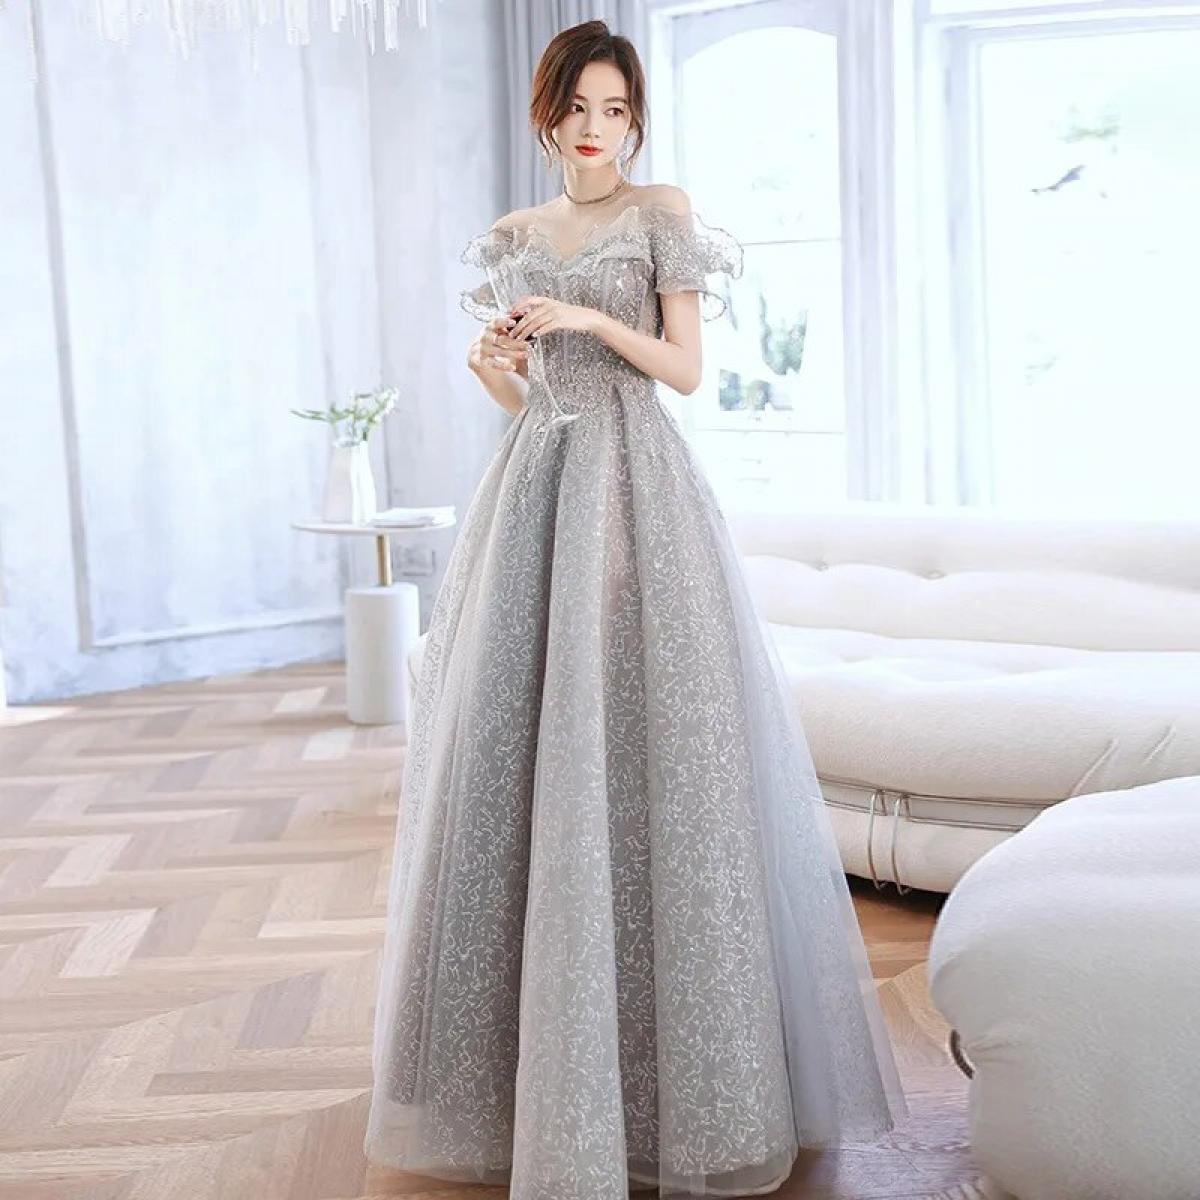 Gala Dresses Woman 2023 For Party Dress Women Elegant Luxury Women's Luxurious Evening Dresses Ball Gowns Prom Formal We